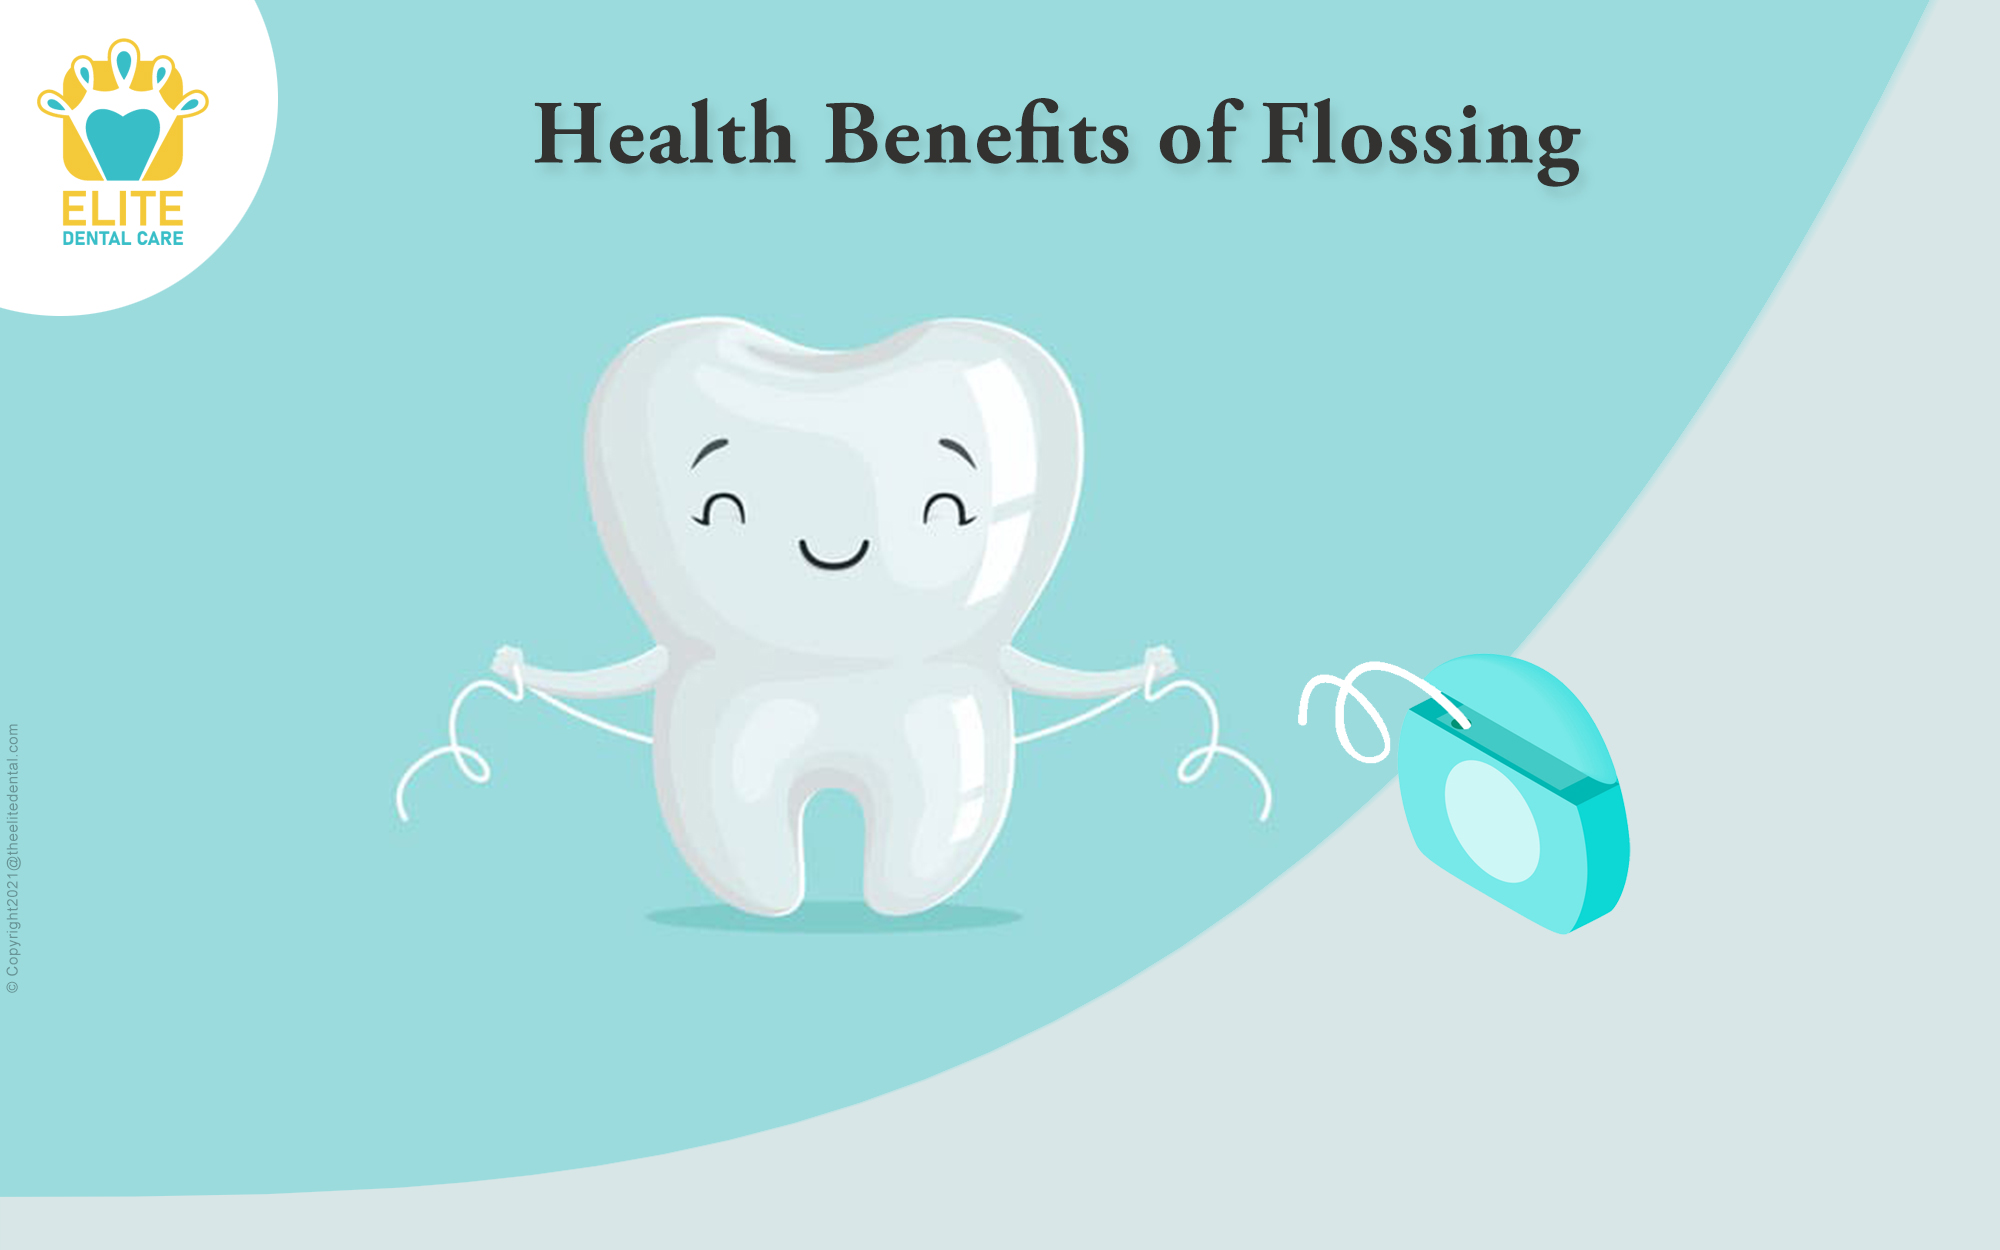 Health Benefits of Flossing